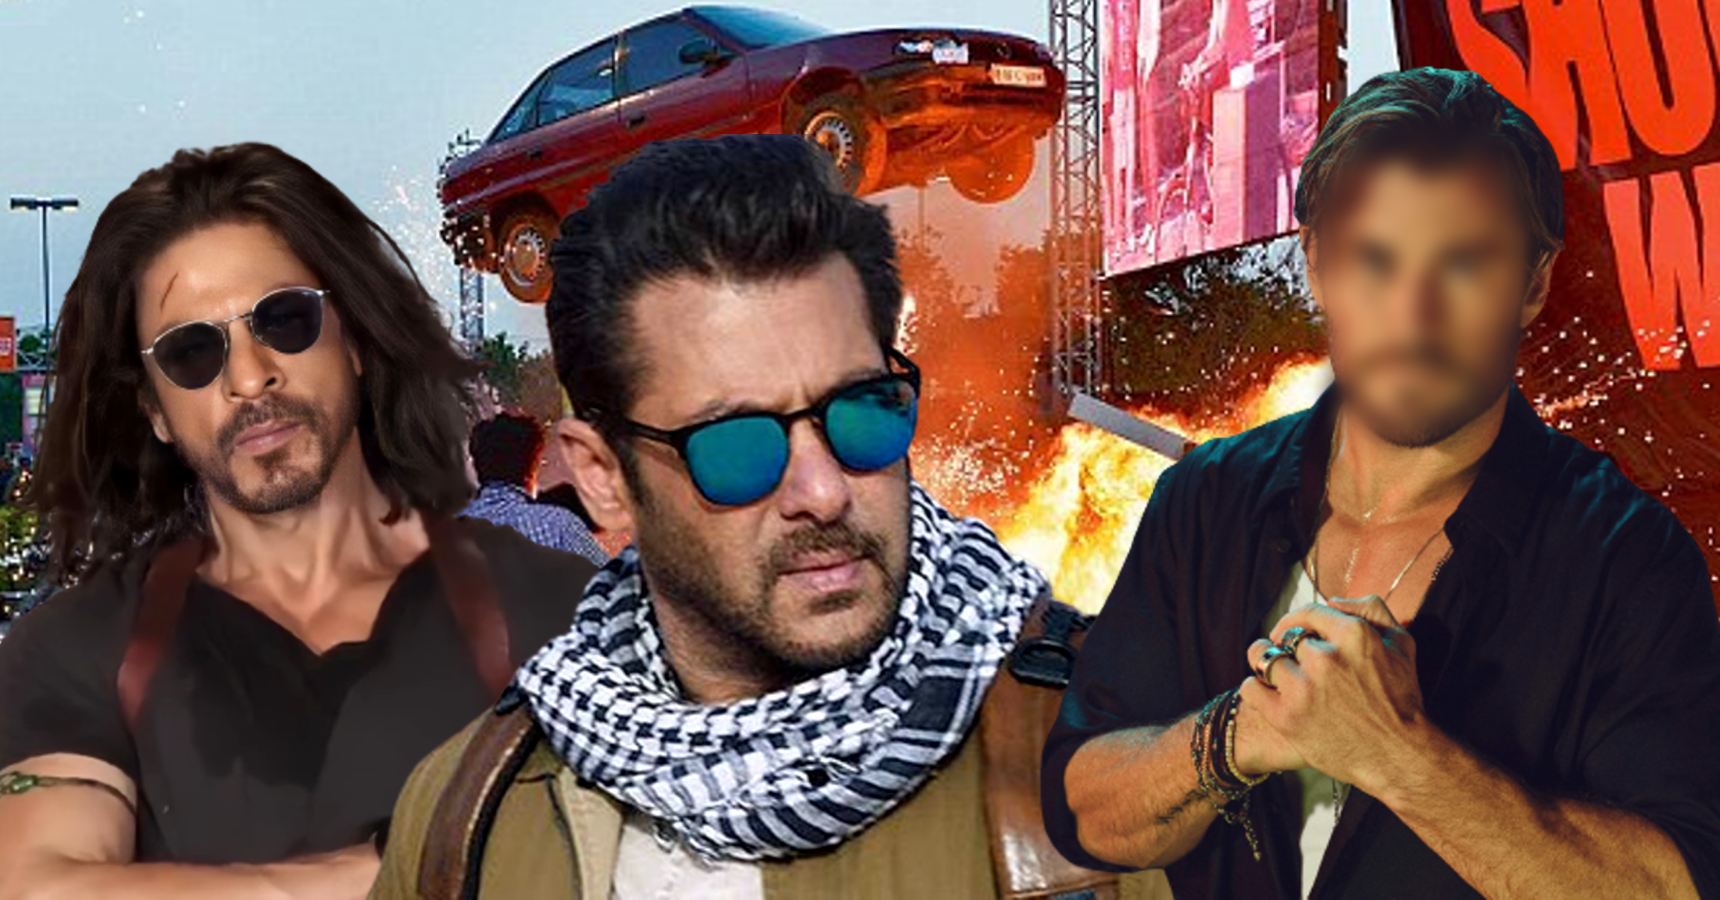 Bollywood actor Salman Khan’s Tiger 3 reportedly has a connection with Avengers Endgame fame Chris Barnes